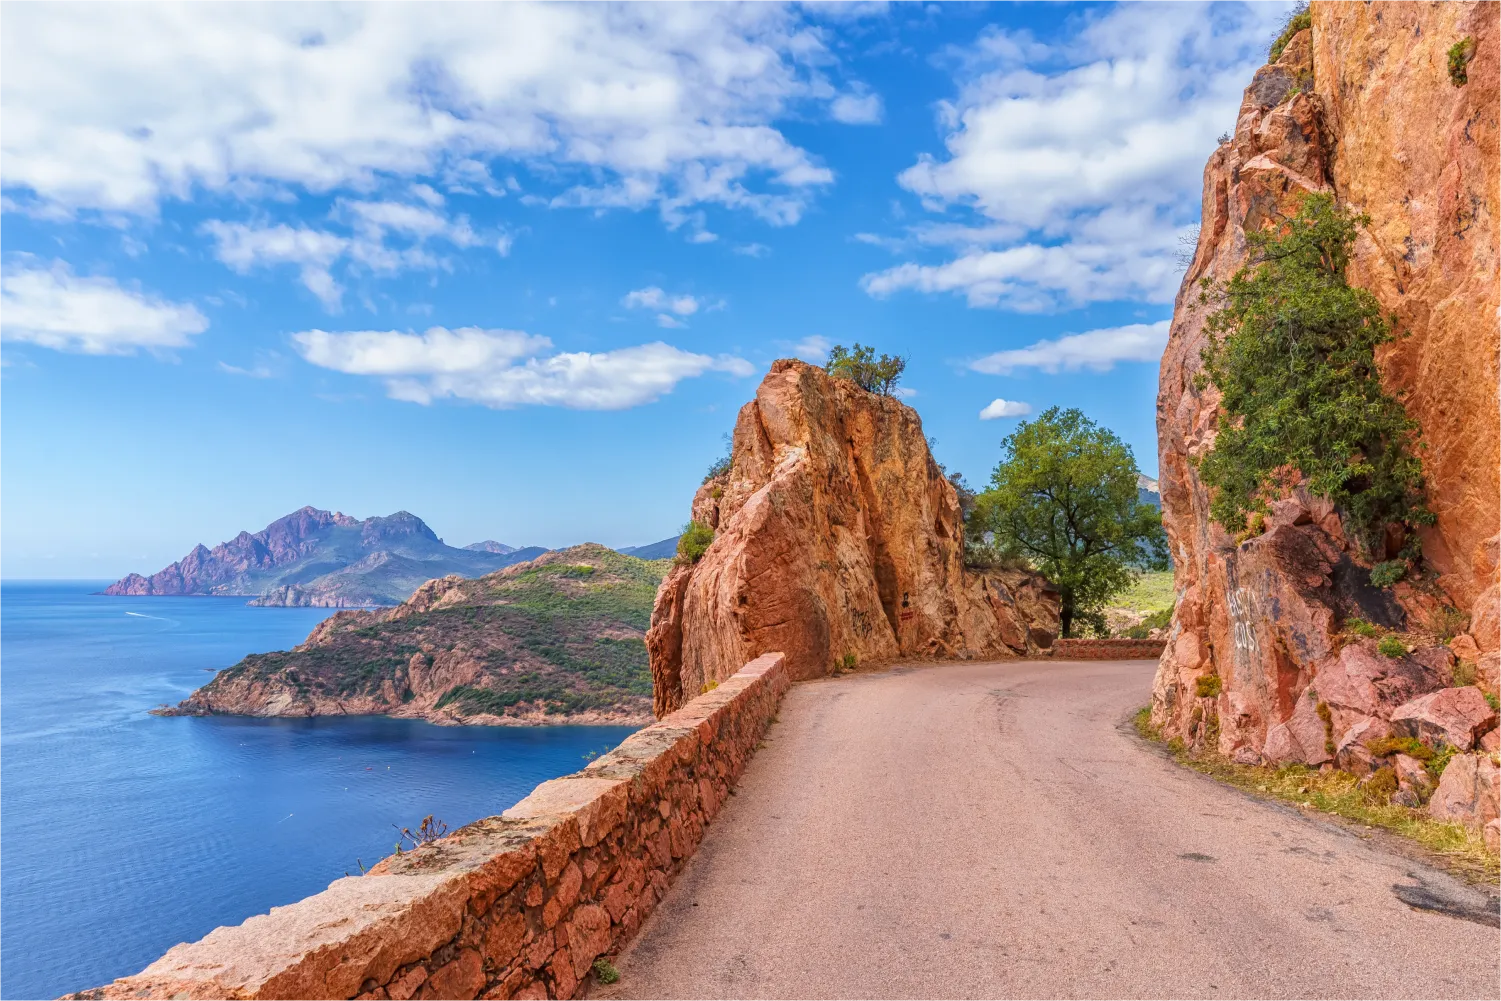 Colorful Mountain Road with sea view on one side, In Calanques De Piana in Corsica, France